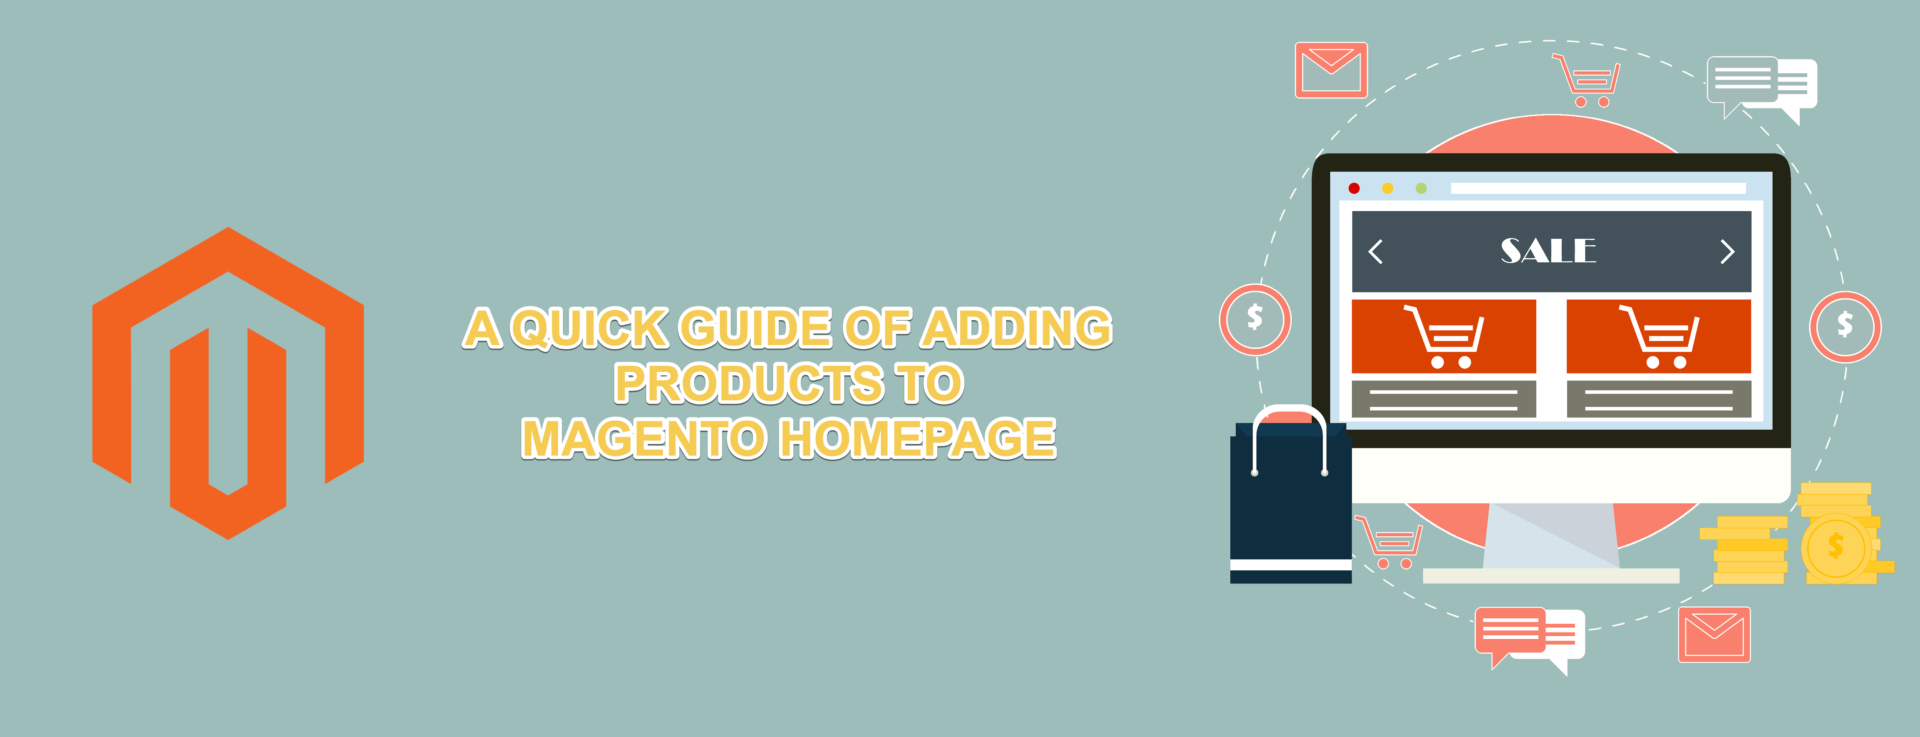 A detail step-by-step guide to add products to homepage Magento 2